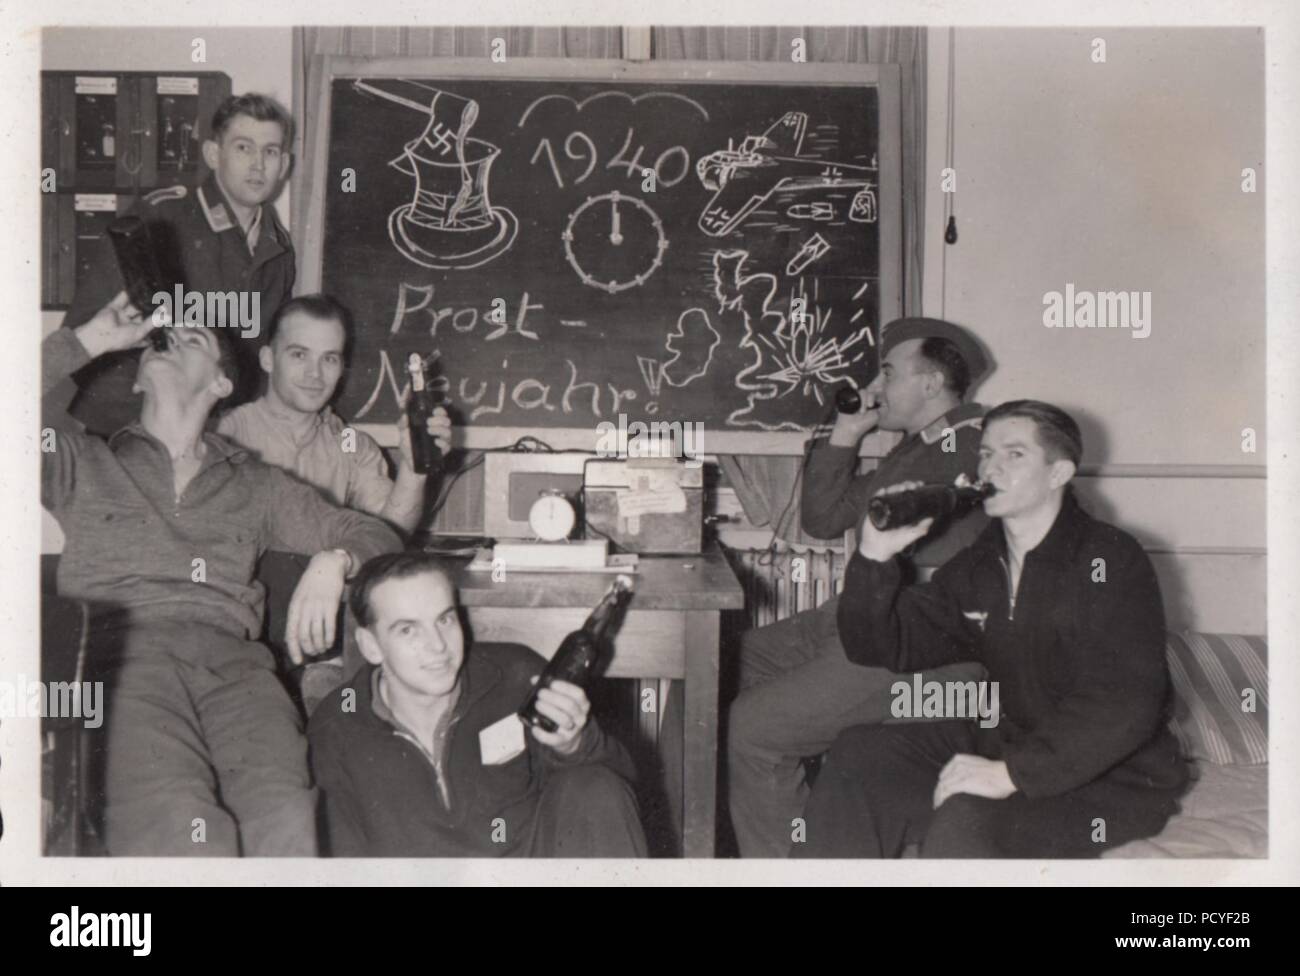 Image from the photo album of Oberfeldwebel Gotthilf Benseler of 9. Staffel, Kampfgeschwader 3: Unteroffizier Gotthilf Benseler answers the phone (rear right) while his fellow airmen of 9./KG 3 celebrate New Year 1940. Stock Photo